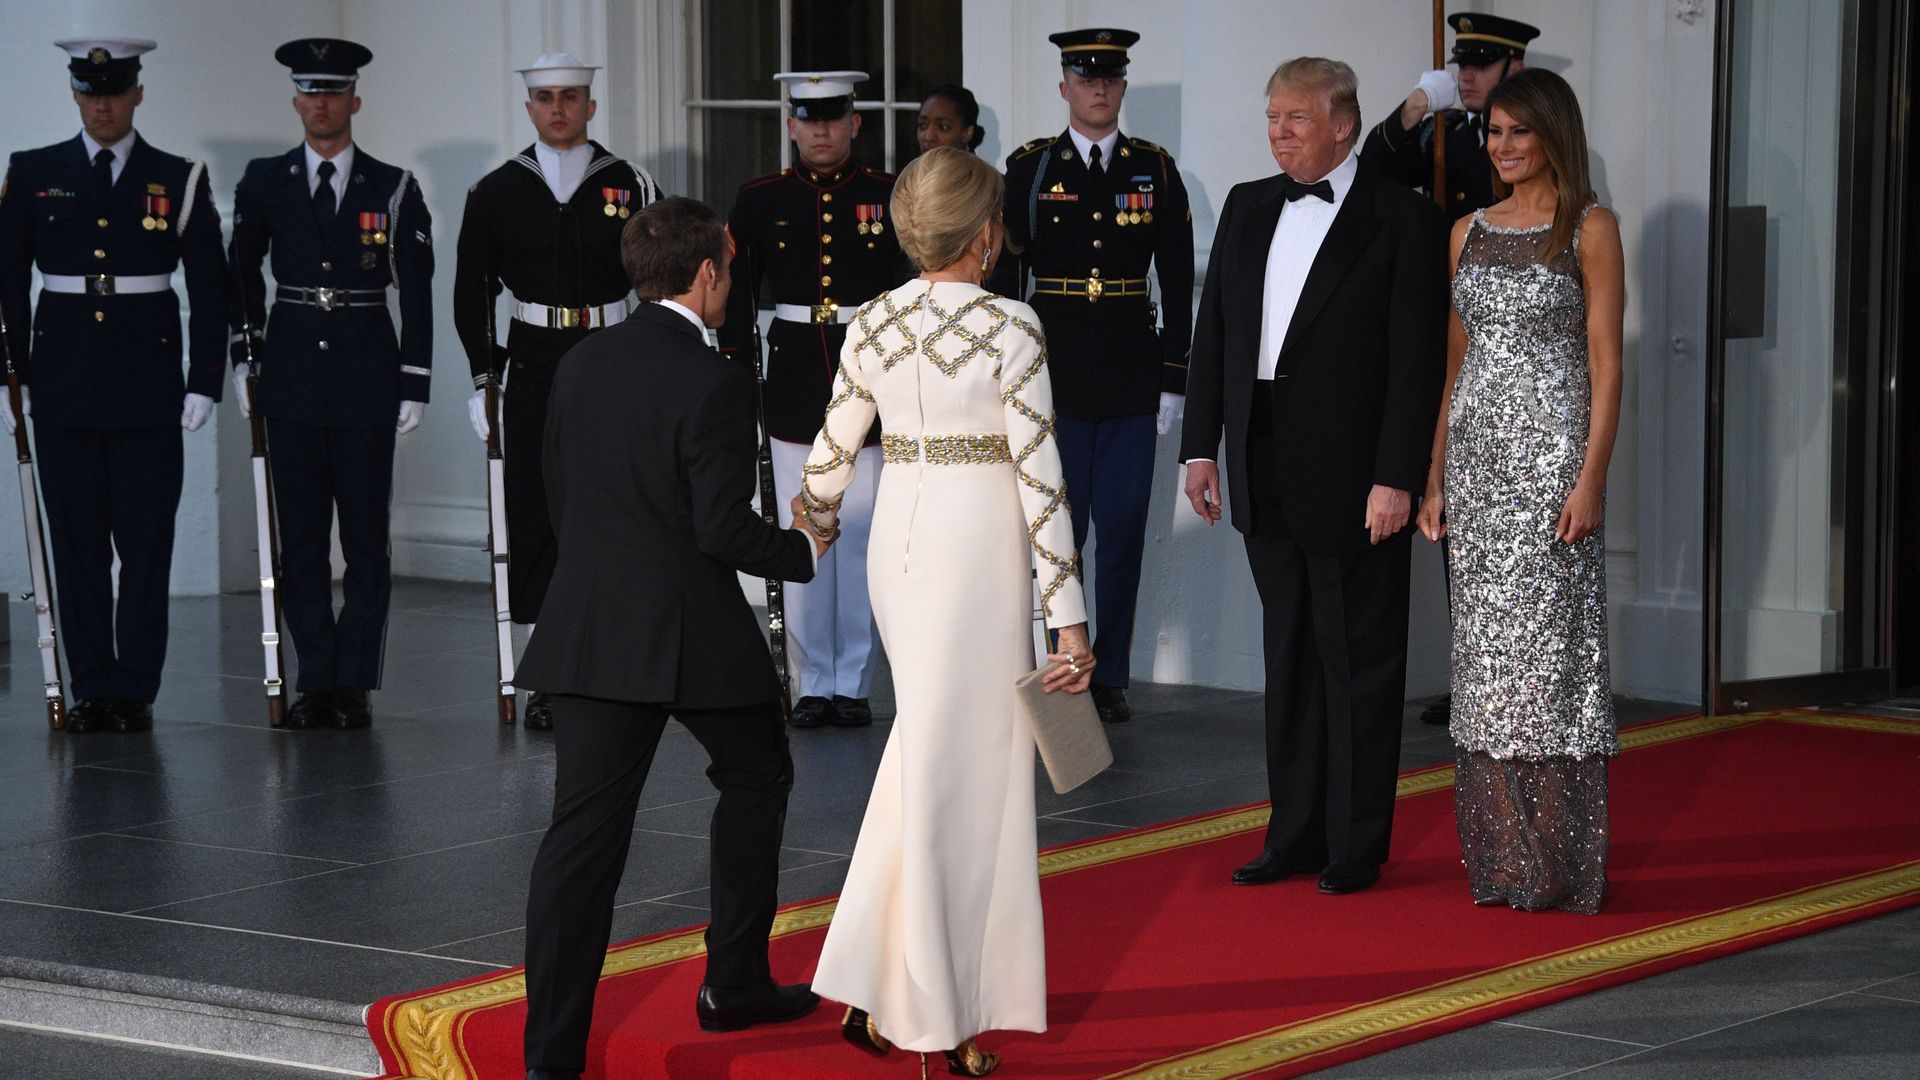 US President Donald Trump and First Lady Melania Trump welcome French President Emmanuel Macron and his wife, Brigitte Macron arriving at the White House. 